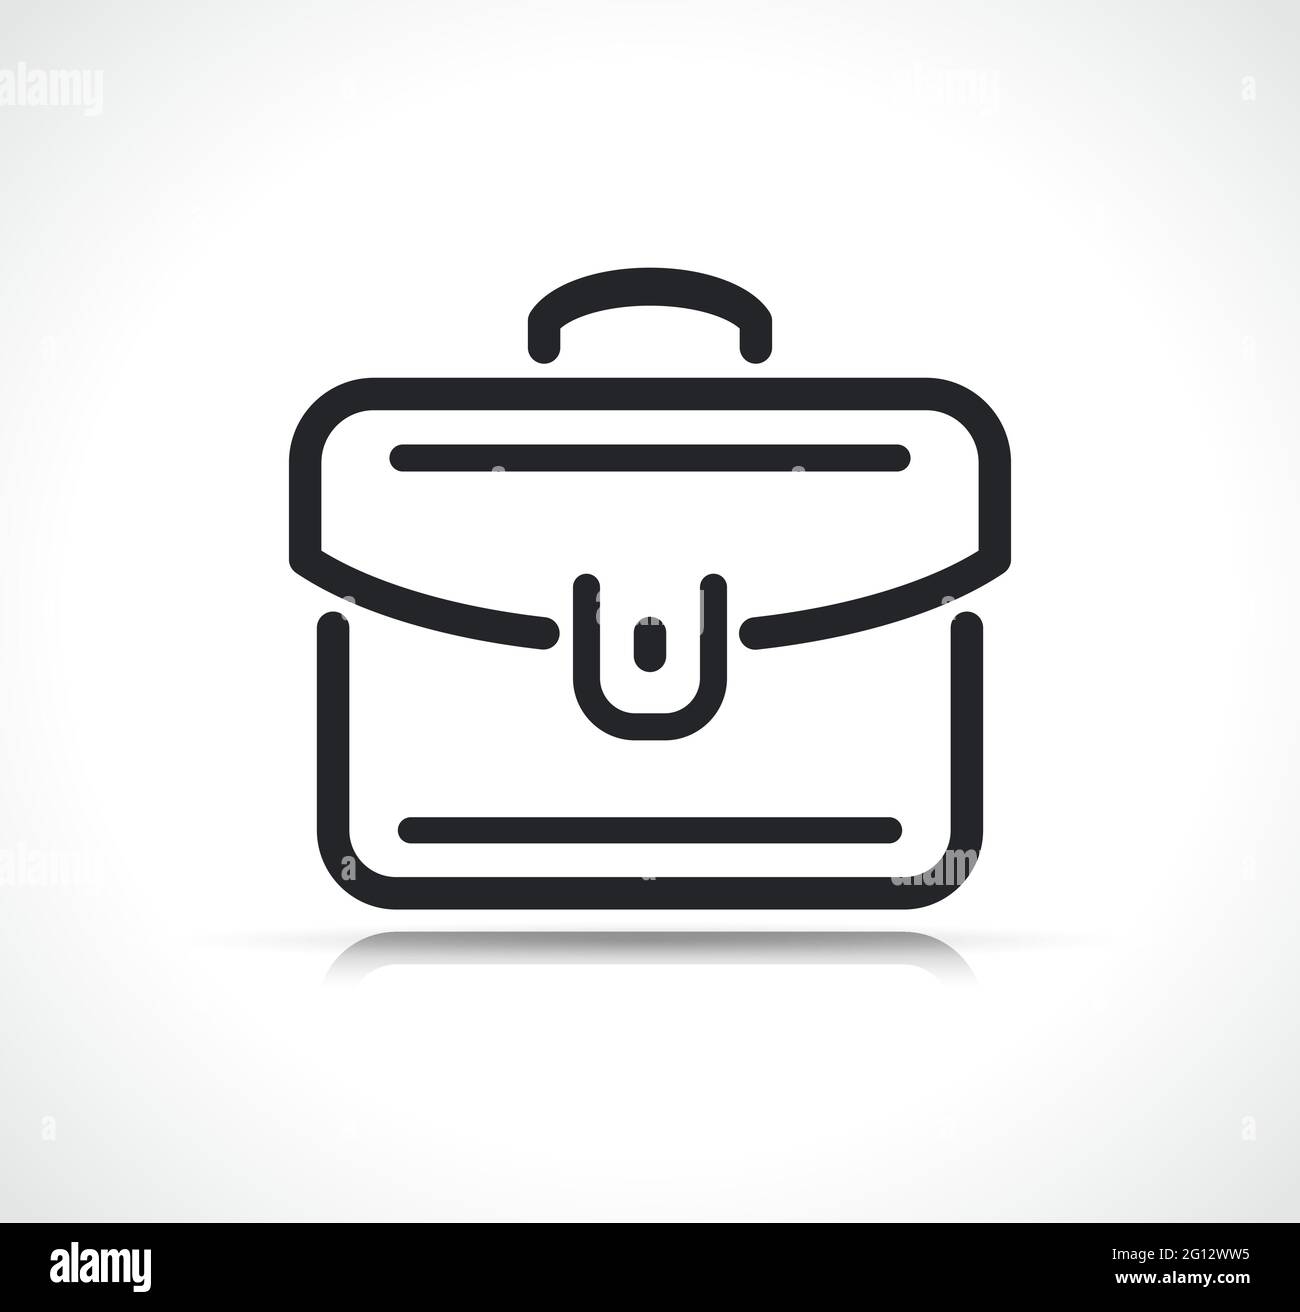 briefcase or suitcase thin line icon isolated Stock Vector